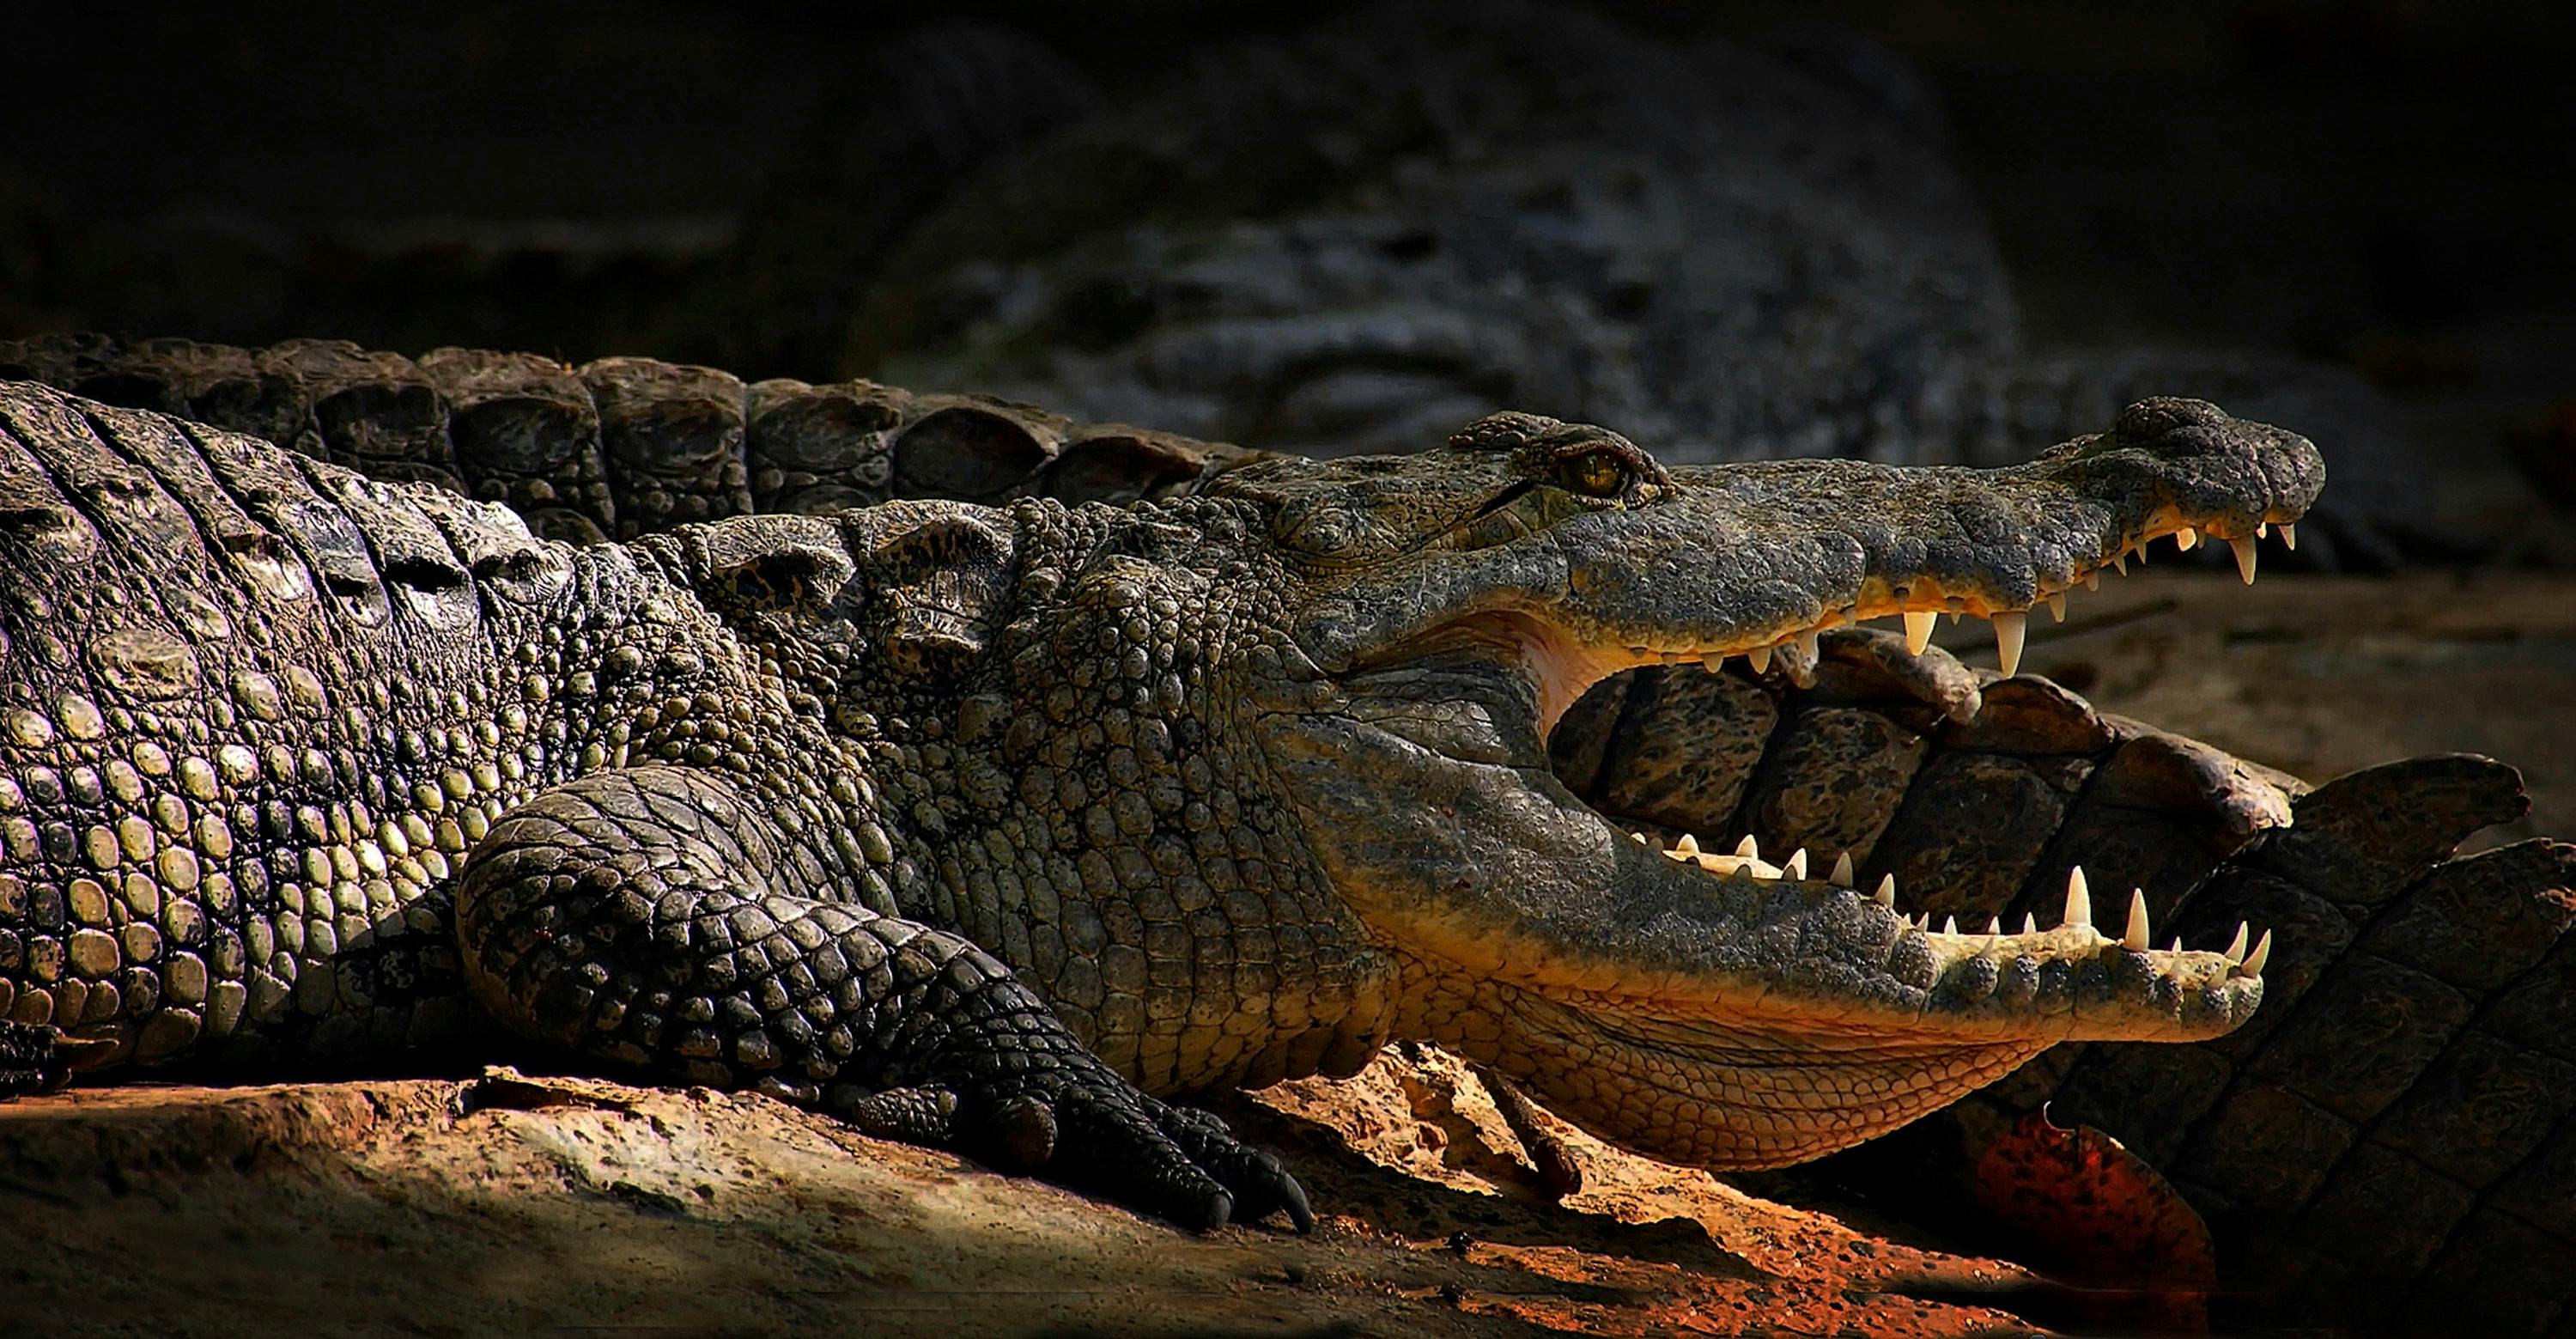 Crocodile Wallpapers (44+ images inside)